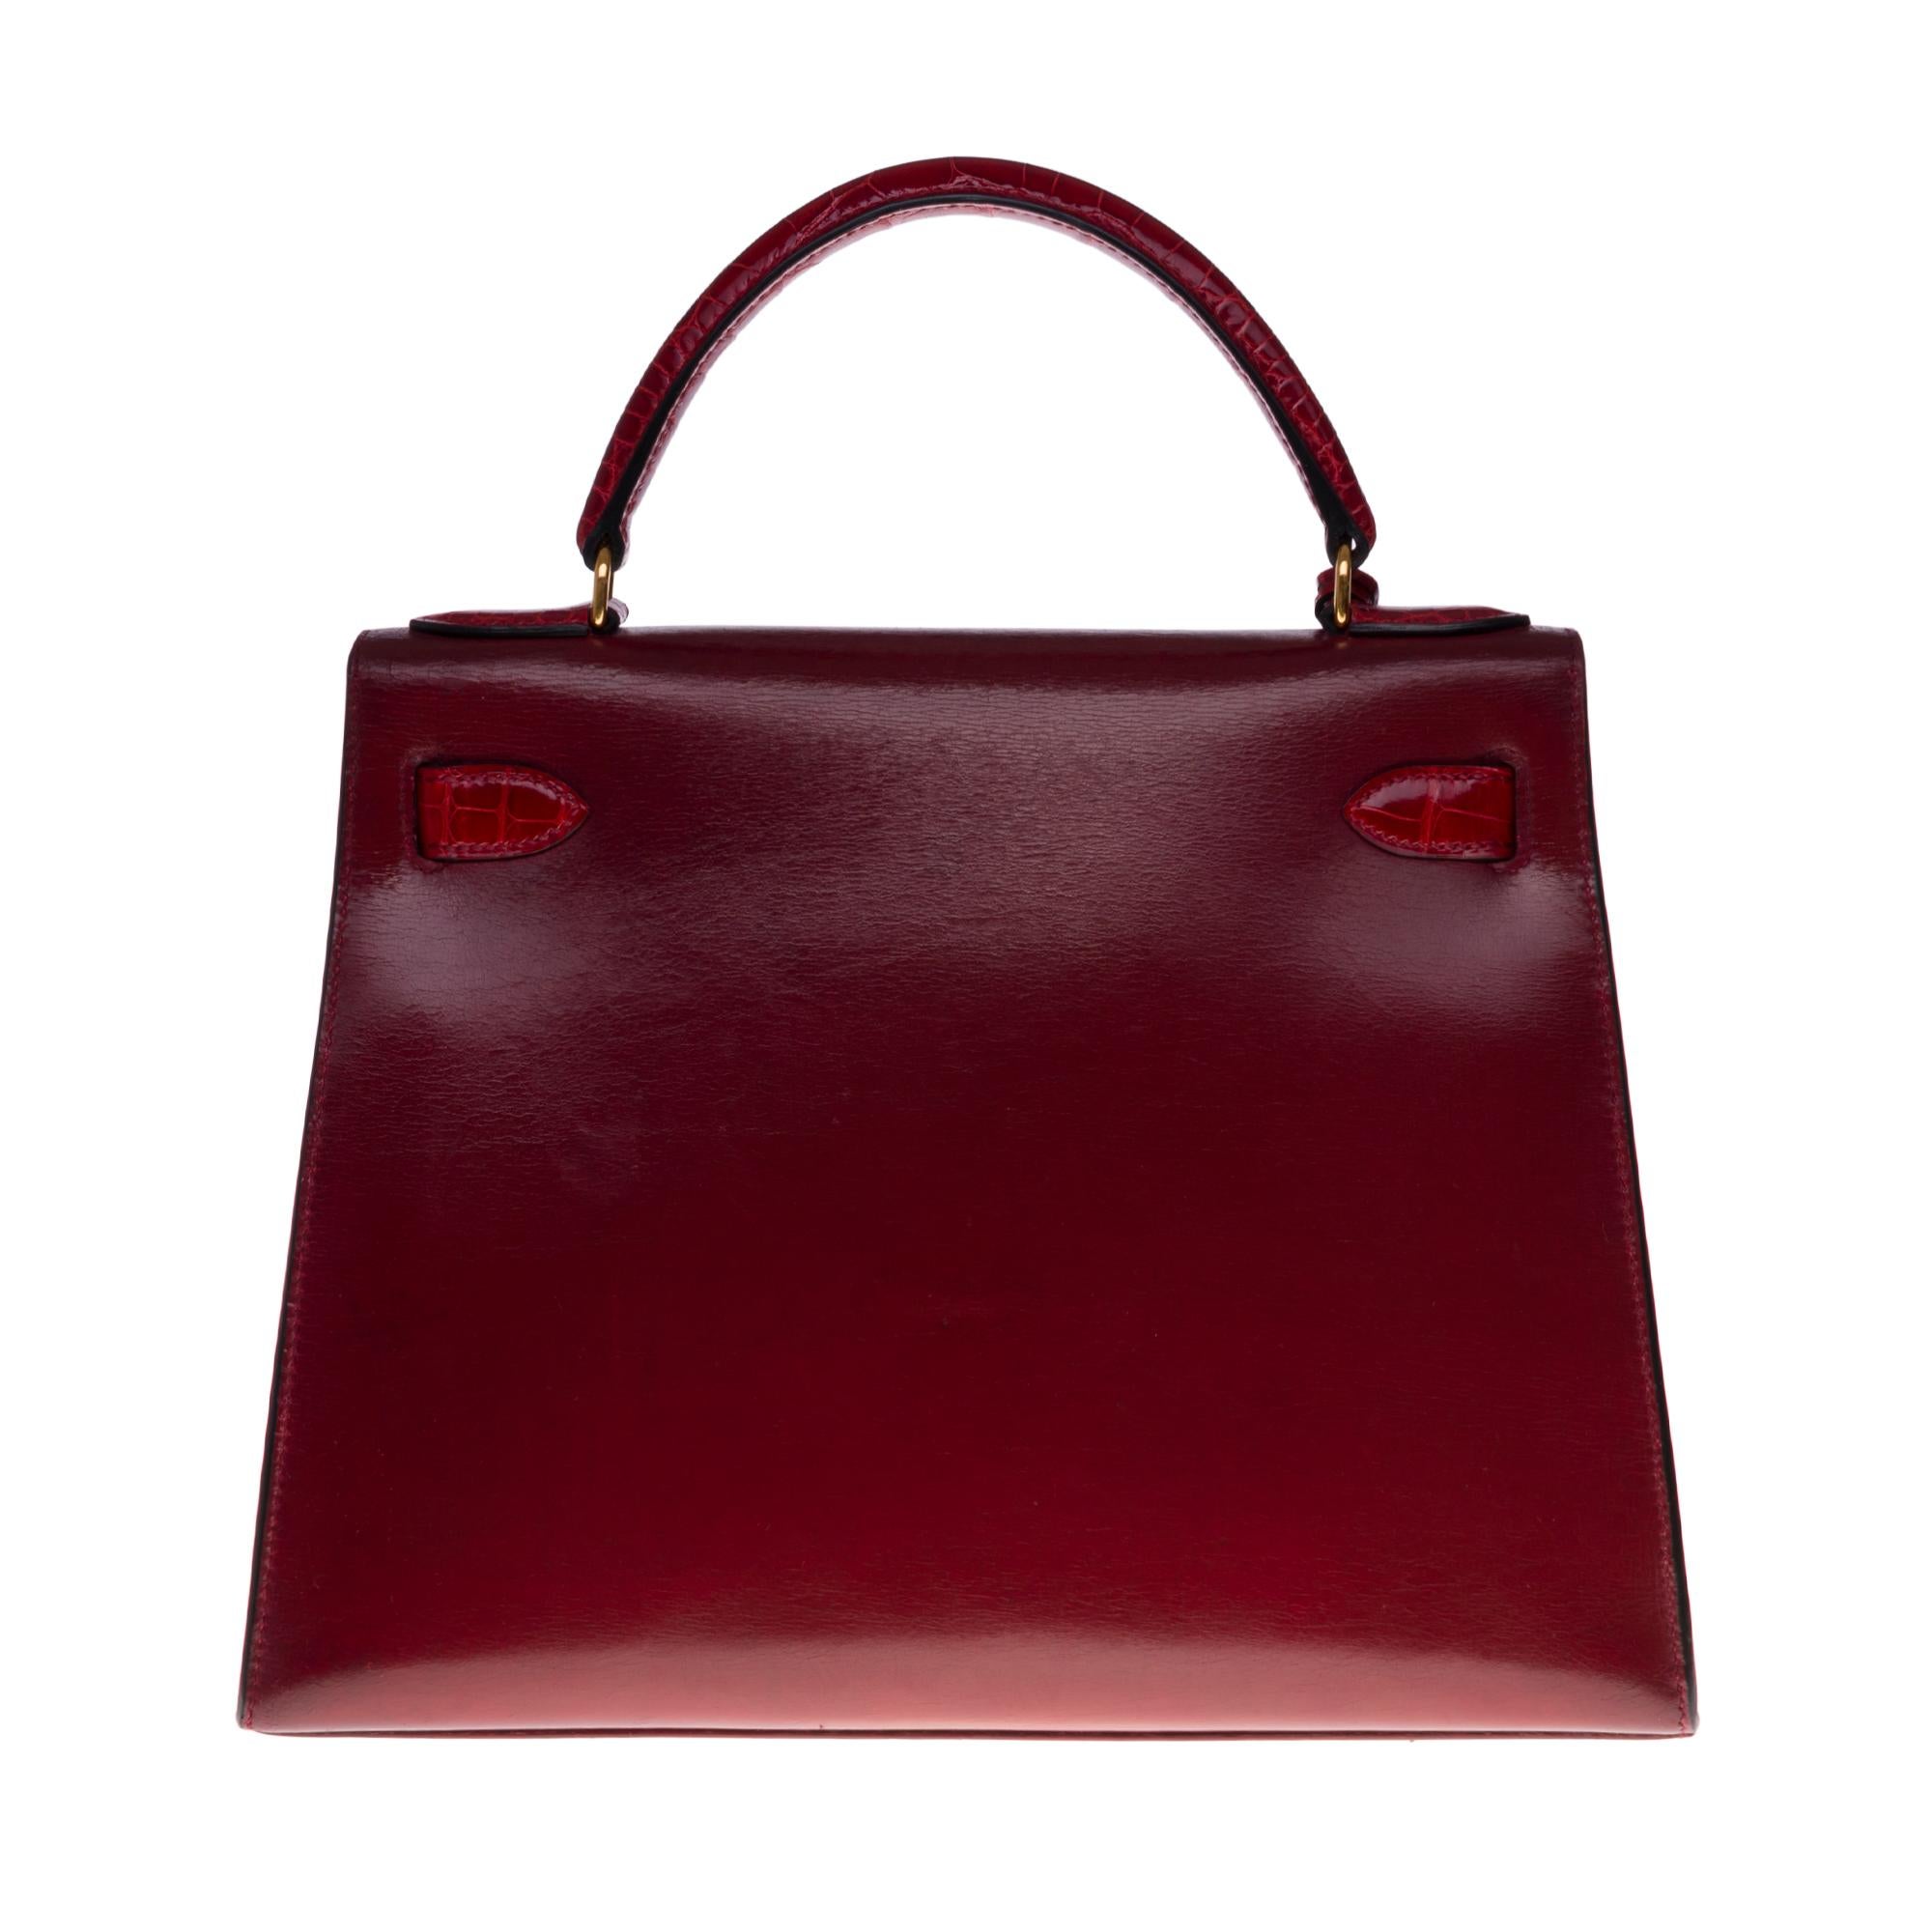 Hermès Kelly 32 saddler bag in leather box Red H customized with two superb bands in red crocodile Porosus on the flap, strap added in red crocodile (not signed), fasteners and clasp in gold-plated metal, handle in new red crocodile leather (not